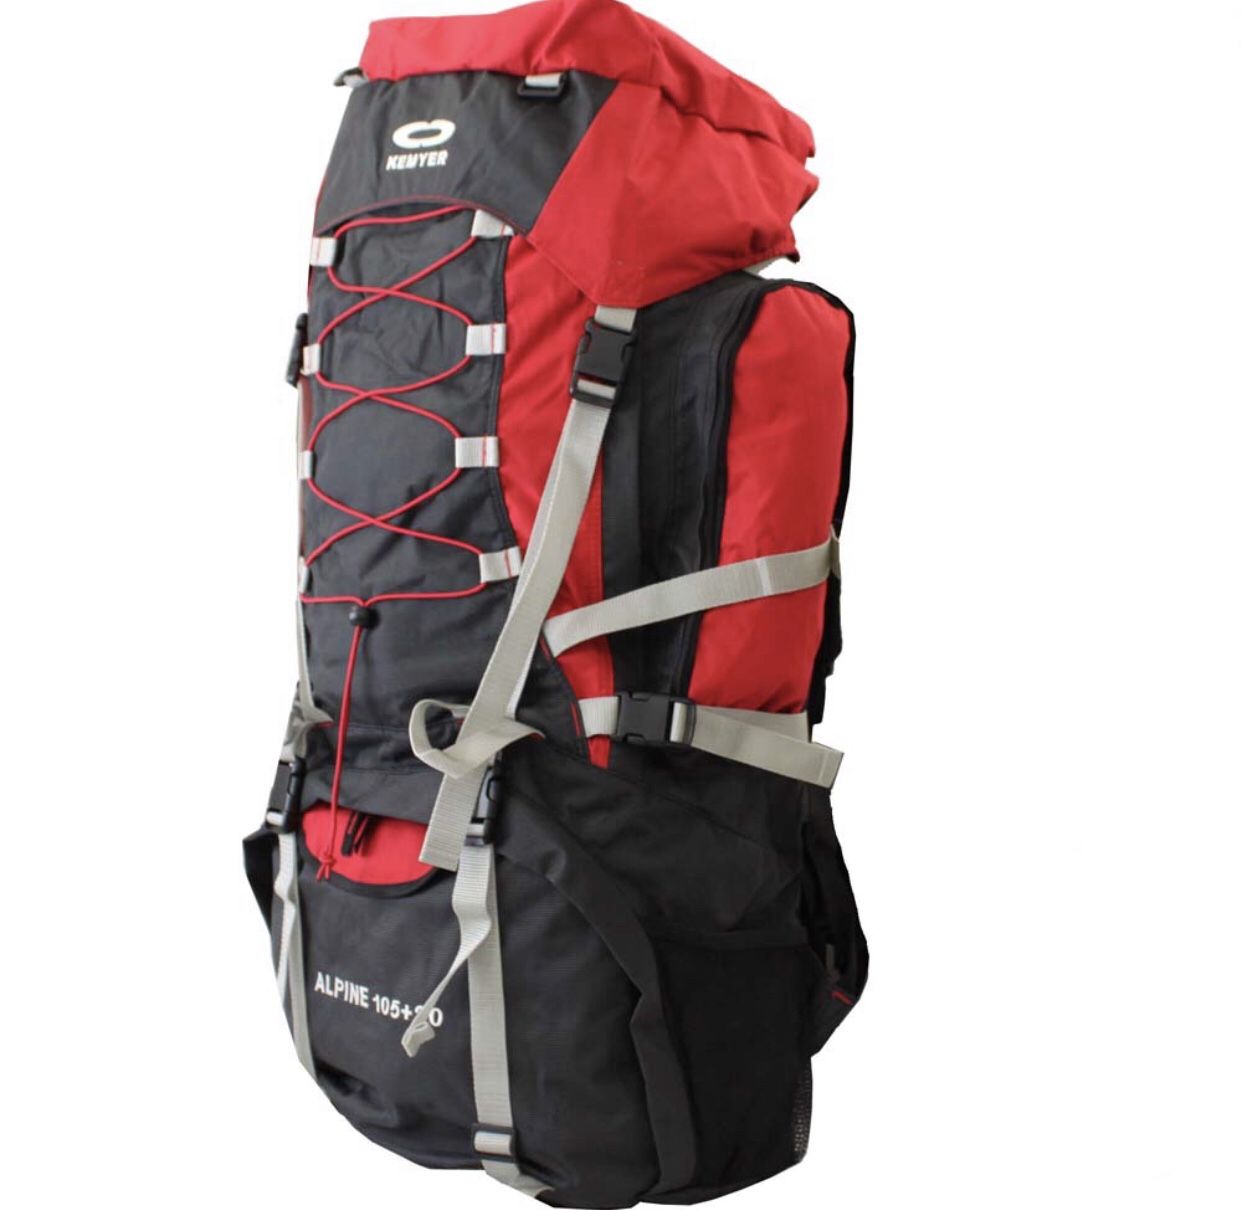 # 25 Kemyer 7100 Cubic Inches Deluxe Hiking Backpack - Red